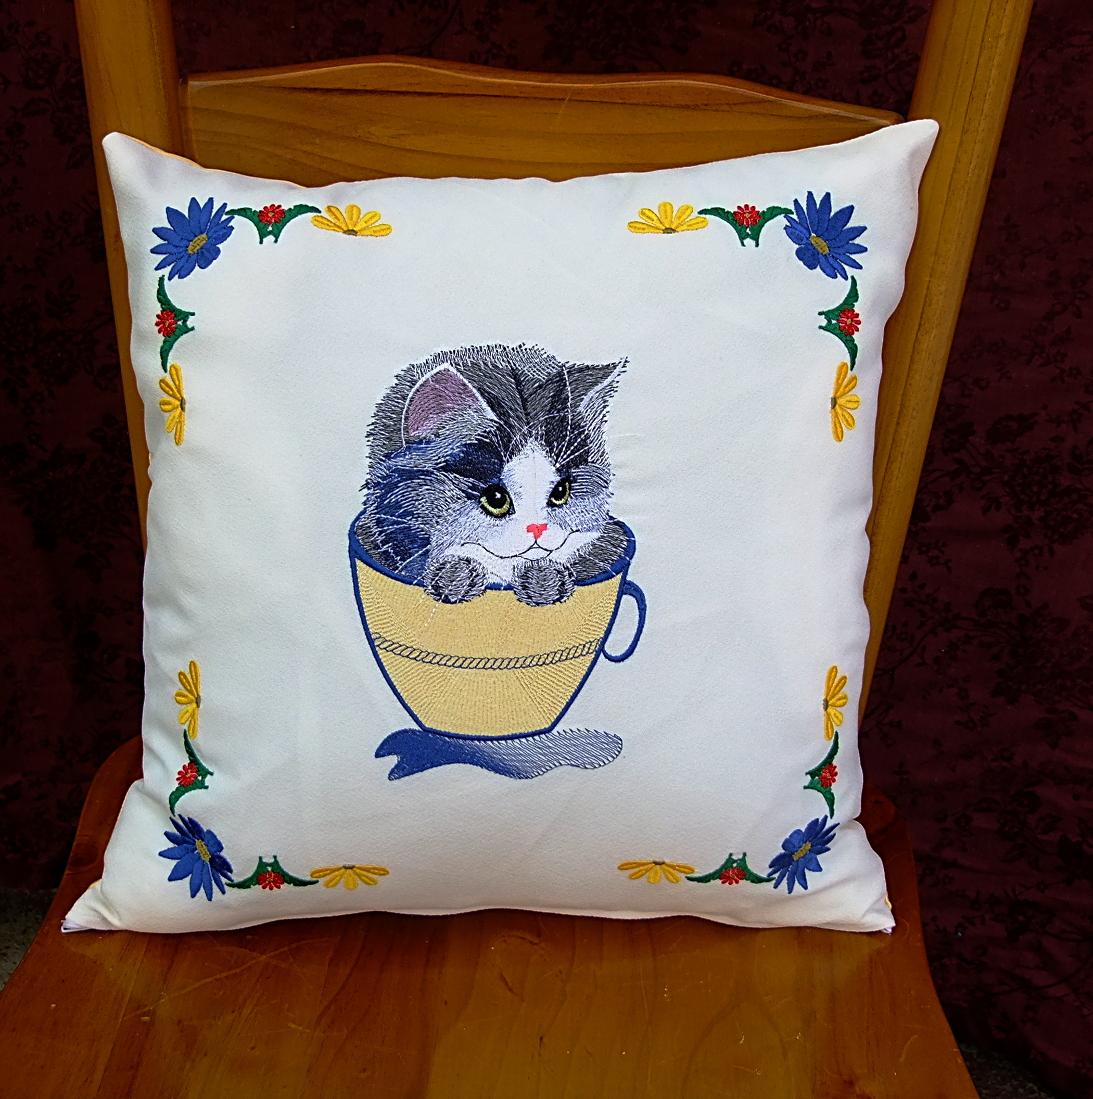 Embroidered cushion with cat mug design